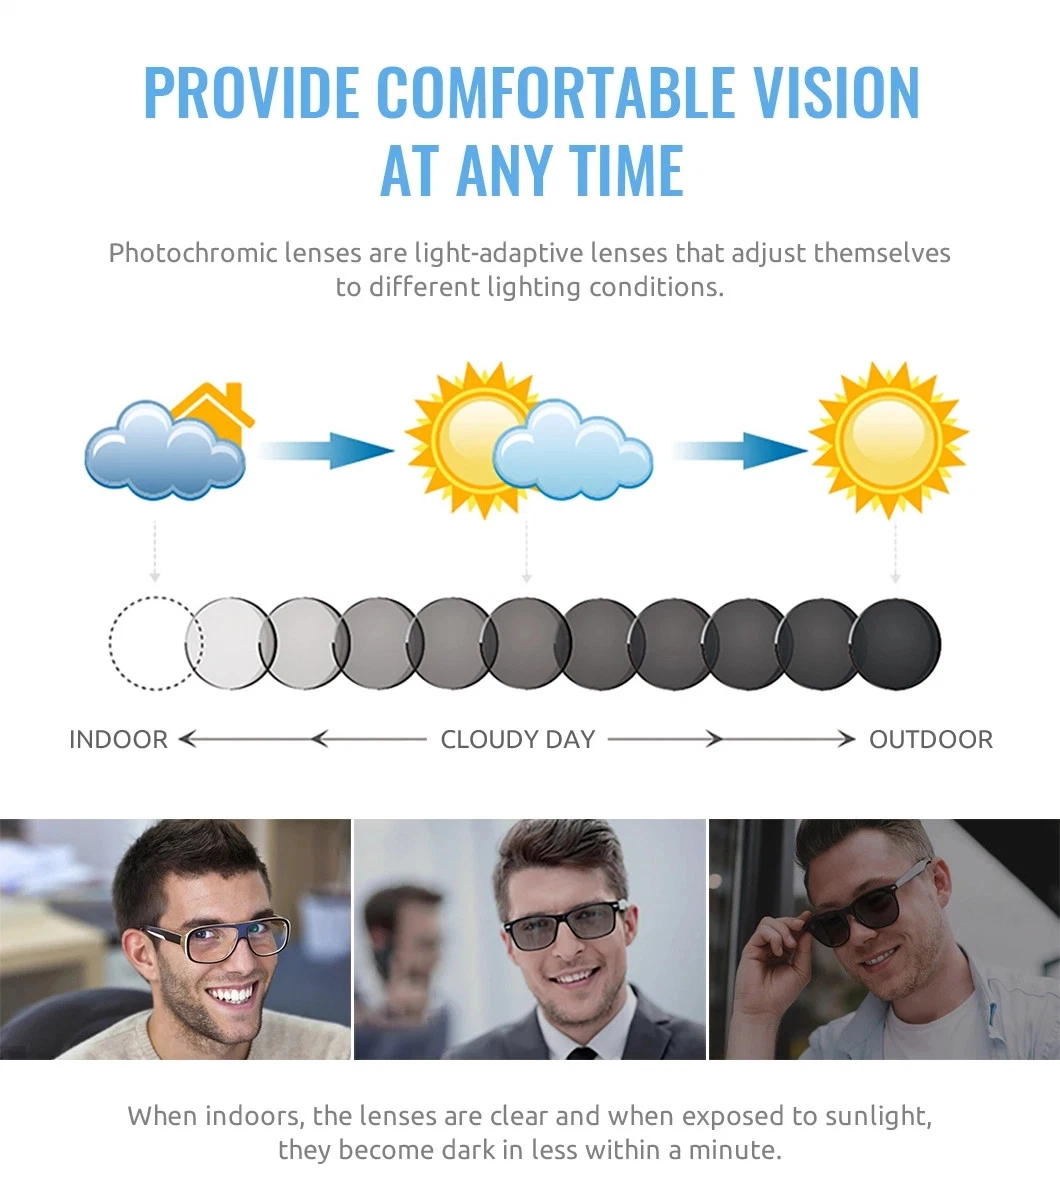 Green Transition Lenses 1.59 Spin Polycarbonate Photochromic Hmc Ophthalmic Lenses Spectacles